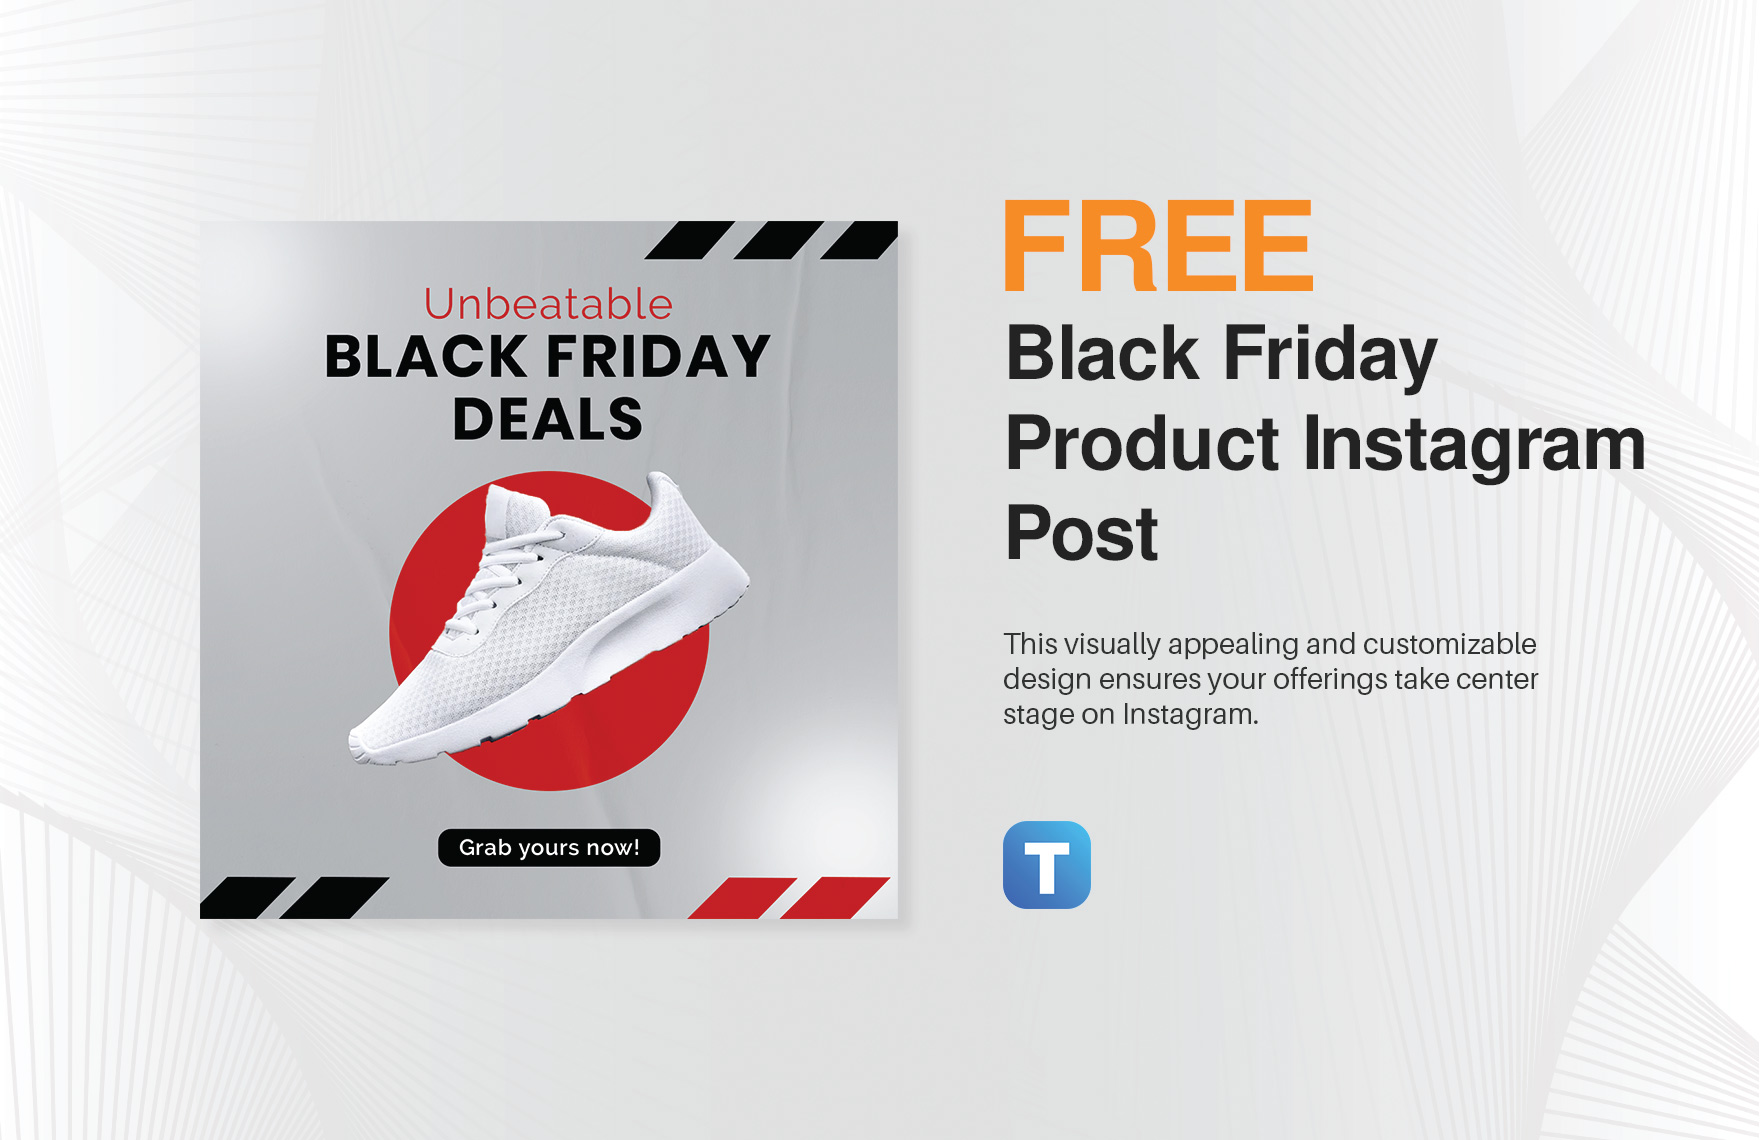 Black Friday Product Instagram Post Template